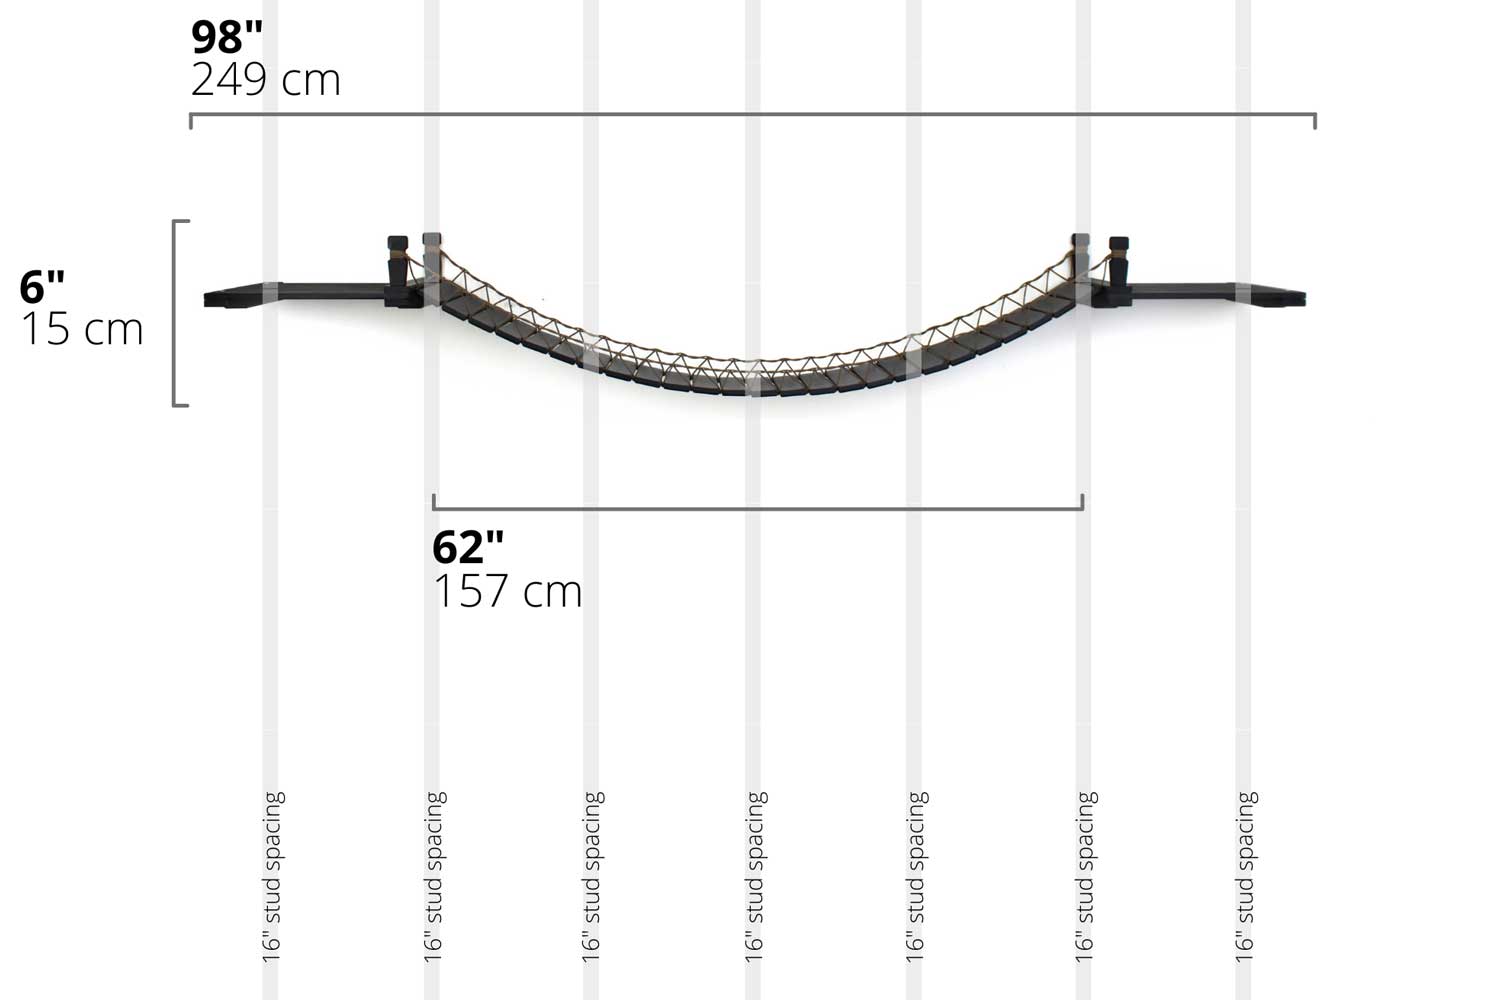 Diagram depicting 66" Bridge with Landings (total of 98" wide) mounted onto a wall with 16" stud spacings.